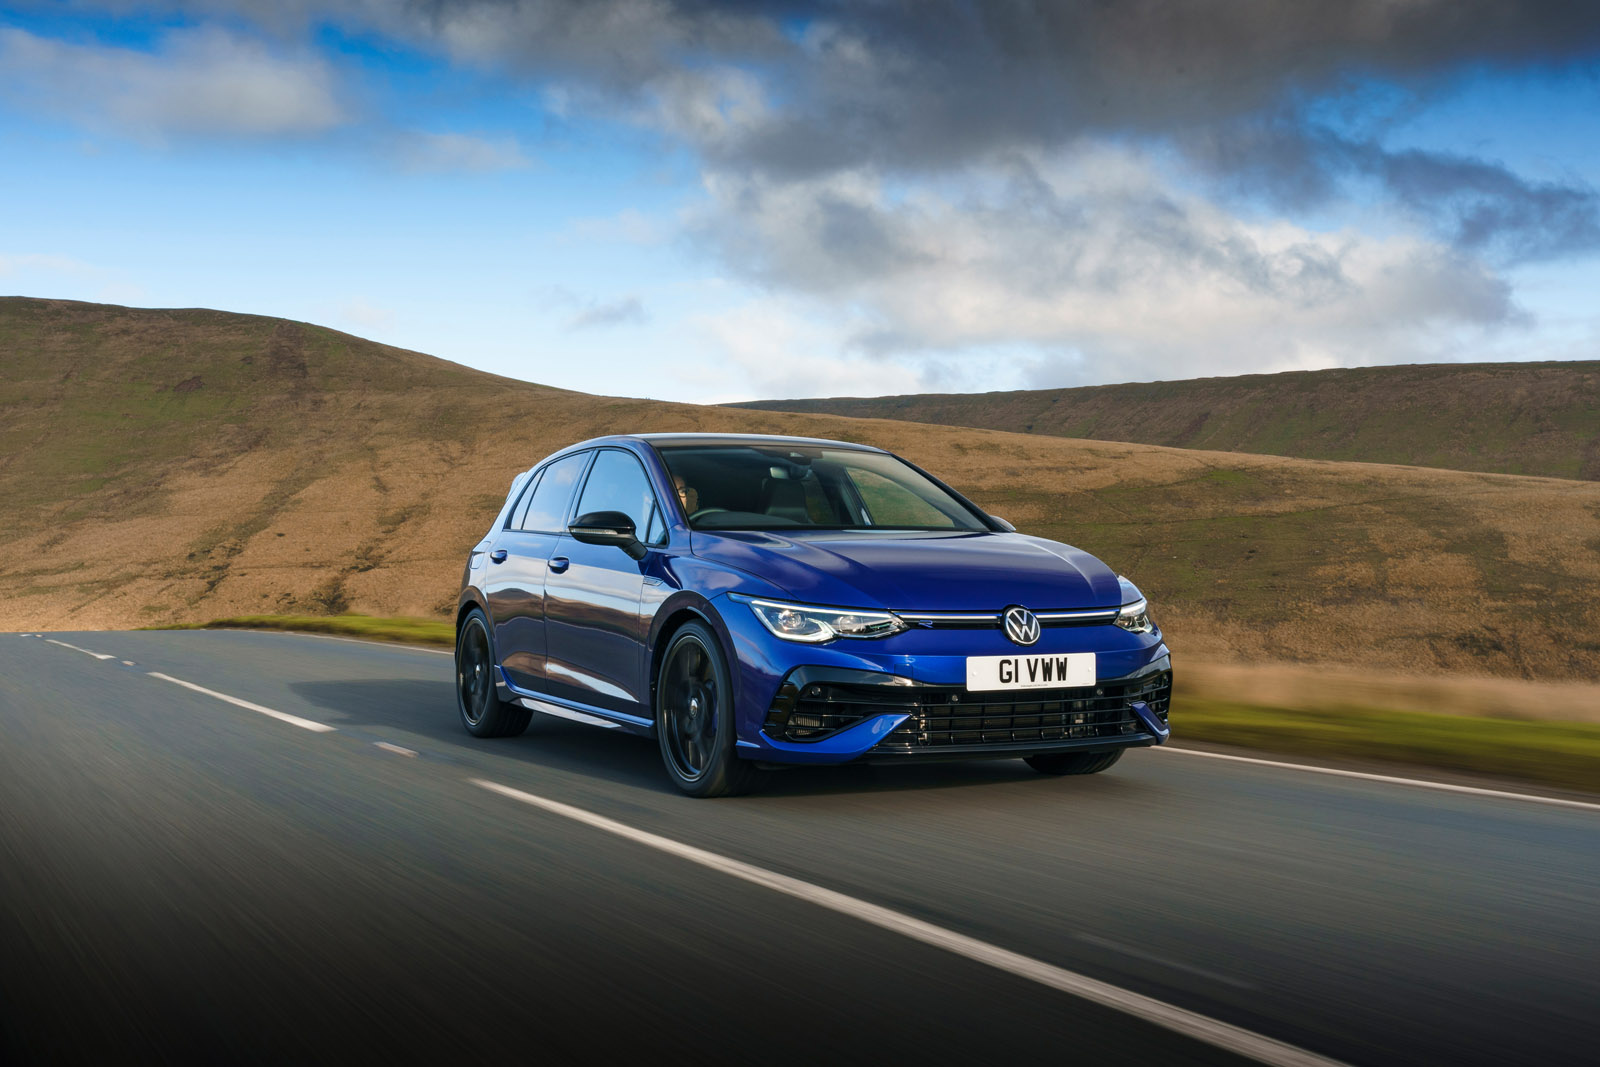 First drive review: 2022 Volkswagen Golf R hits on dynamics, misses on  controls